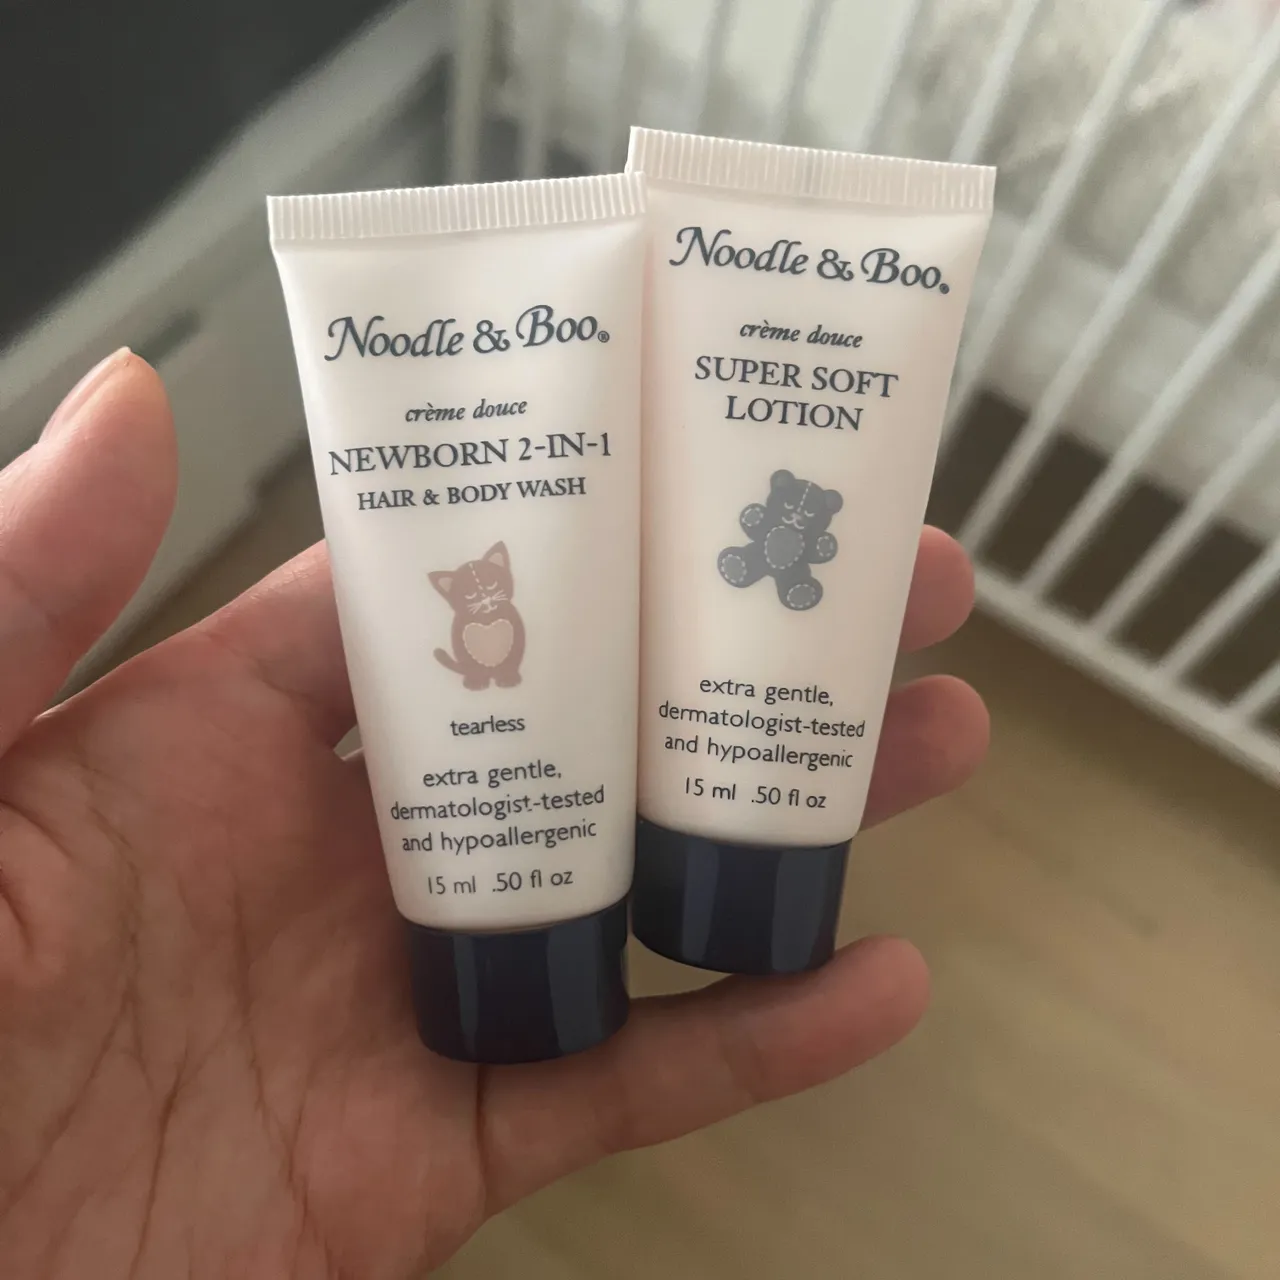 Noodle & Boo baby wash and lotion samples photo 1